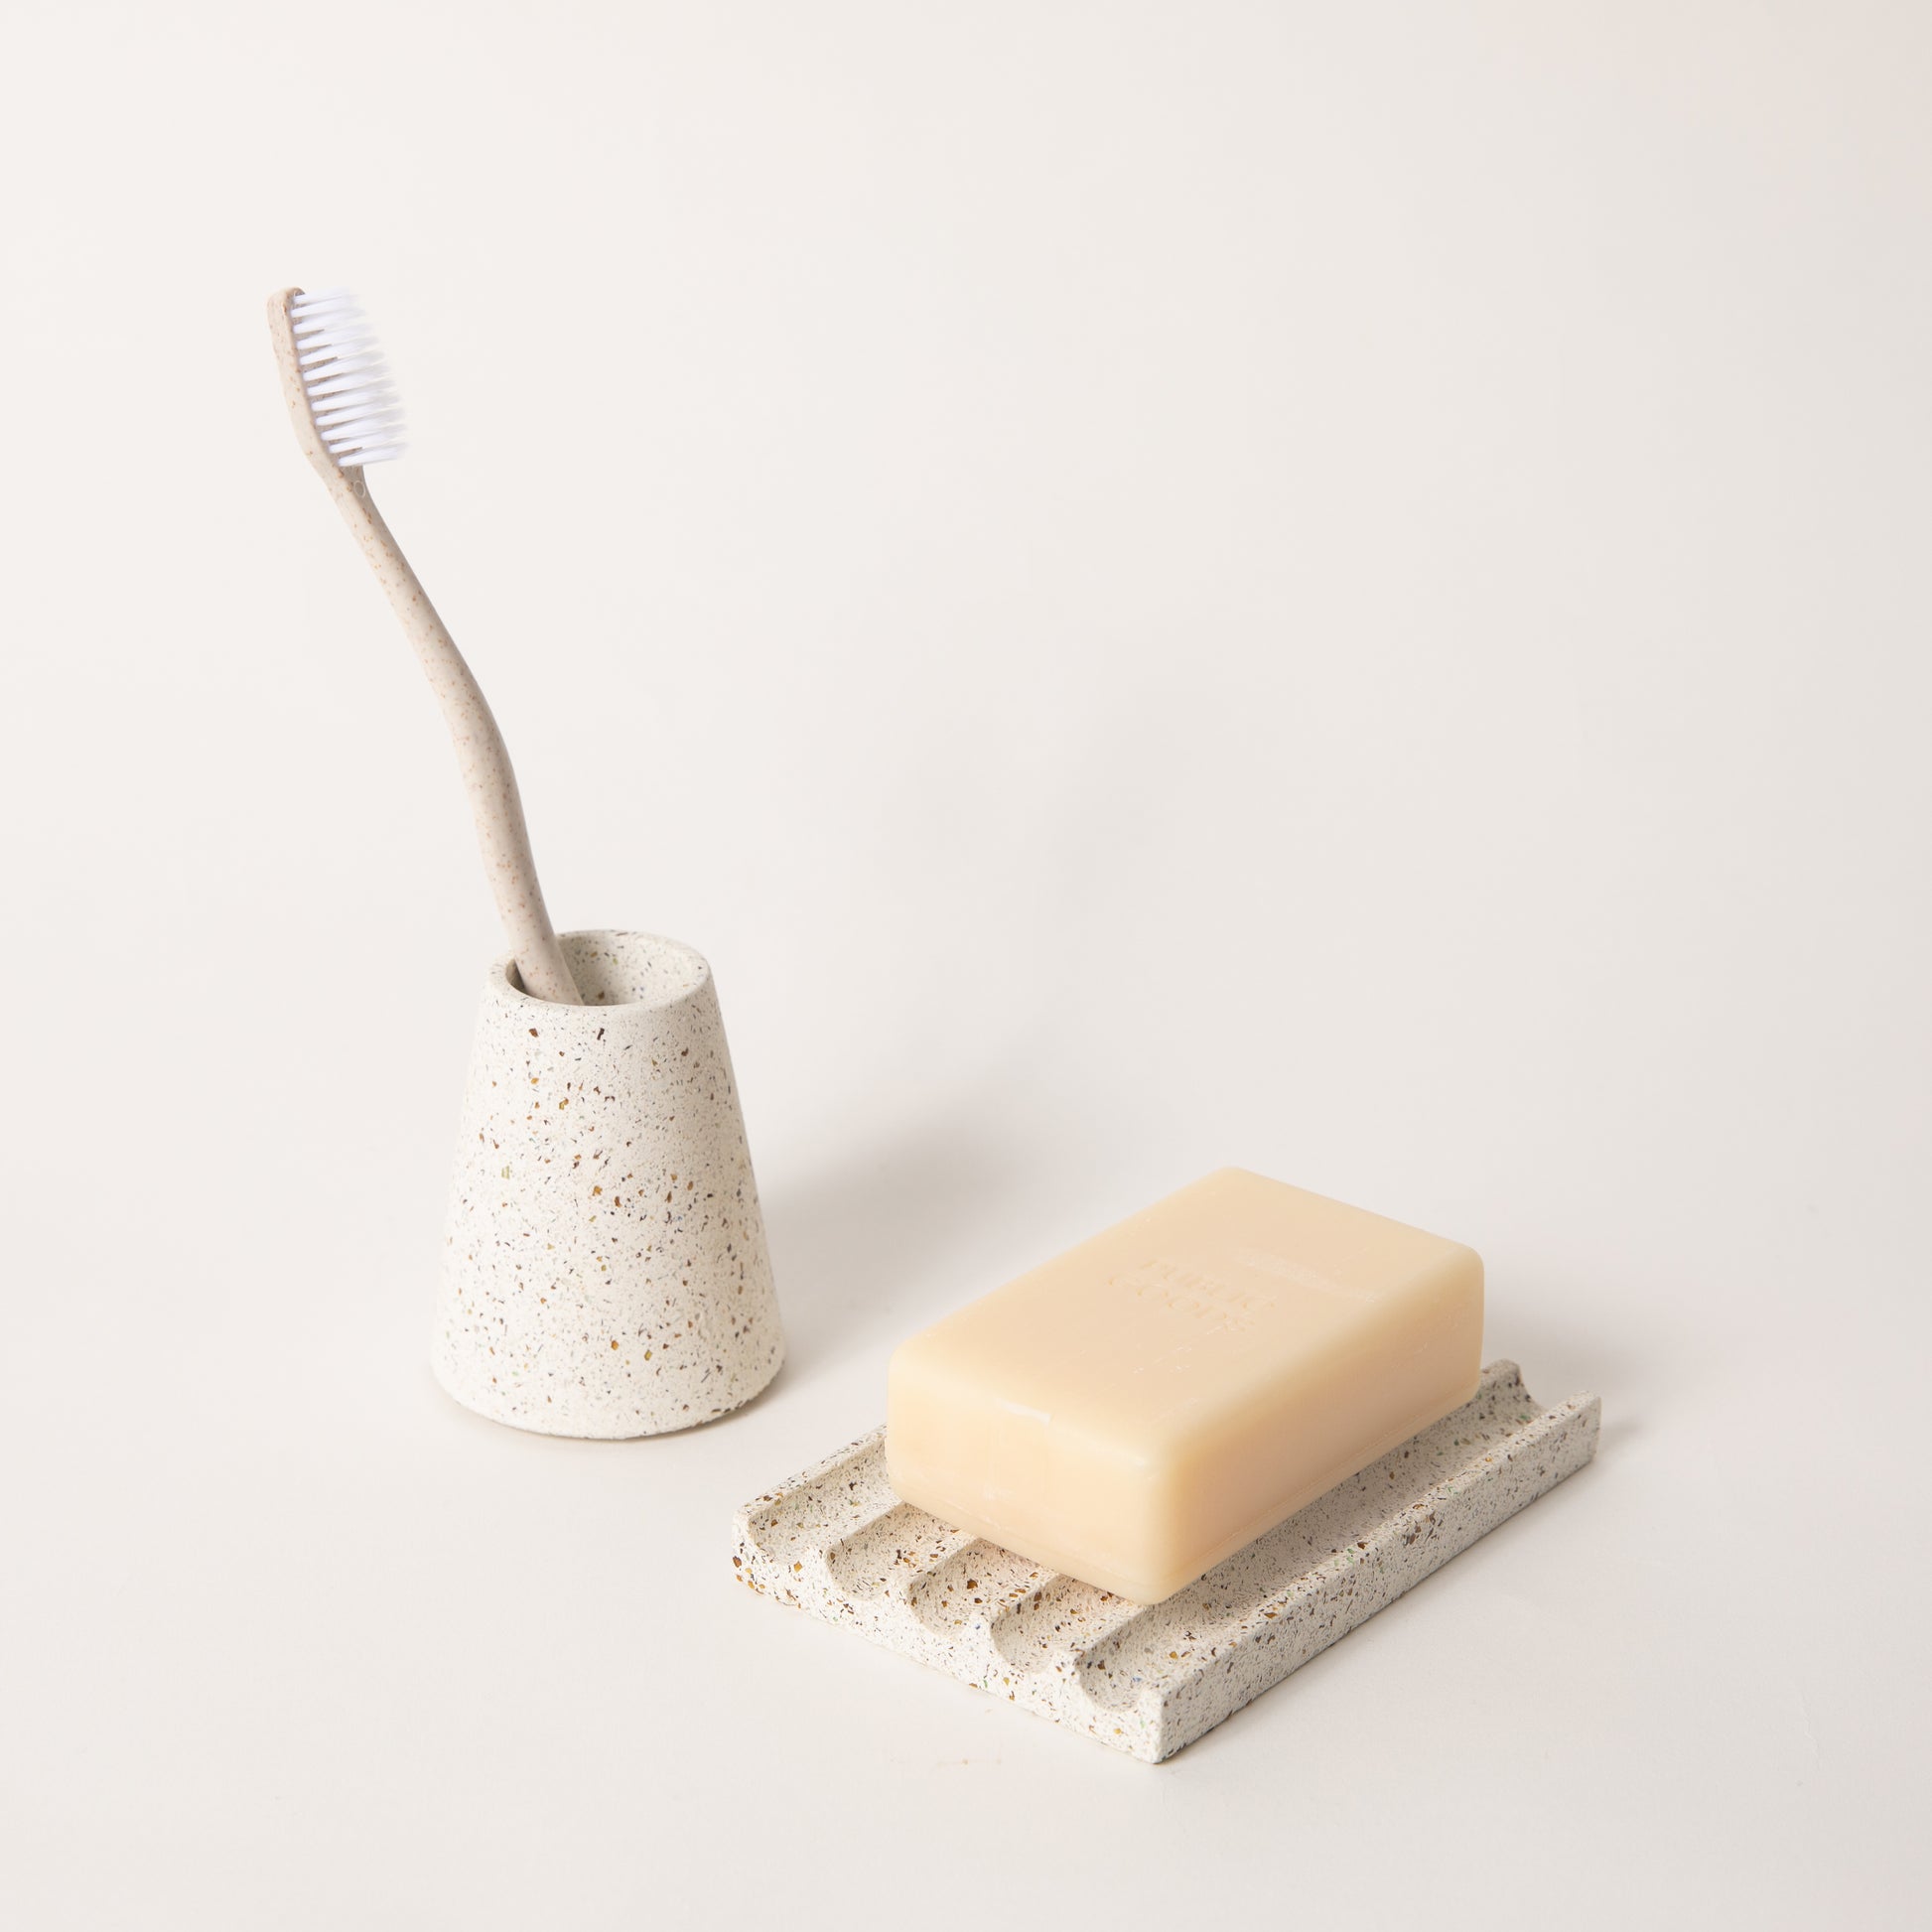 White terrazzo toothbrush holder & soap dish set, styled with a toothbrush & bar of soap.